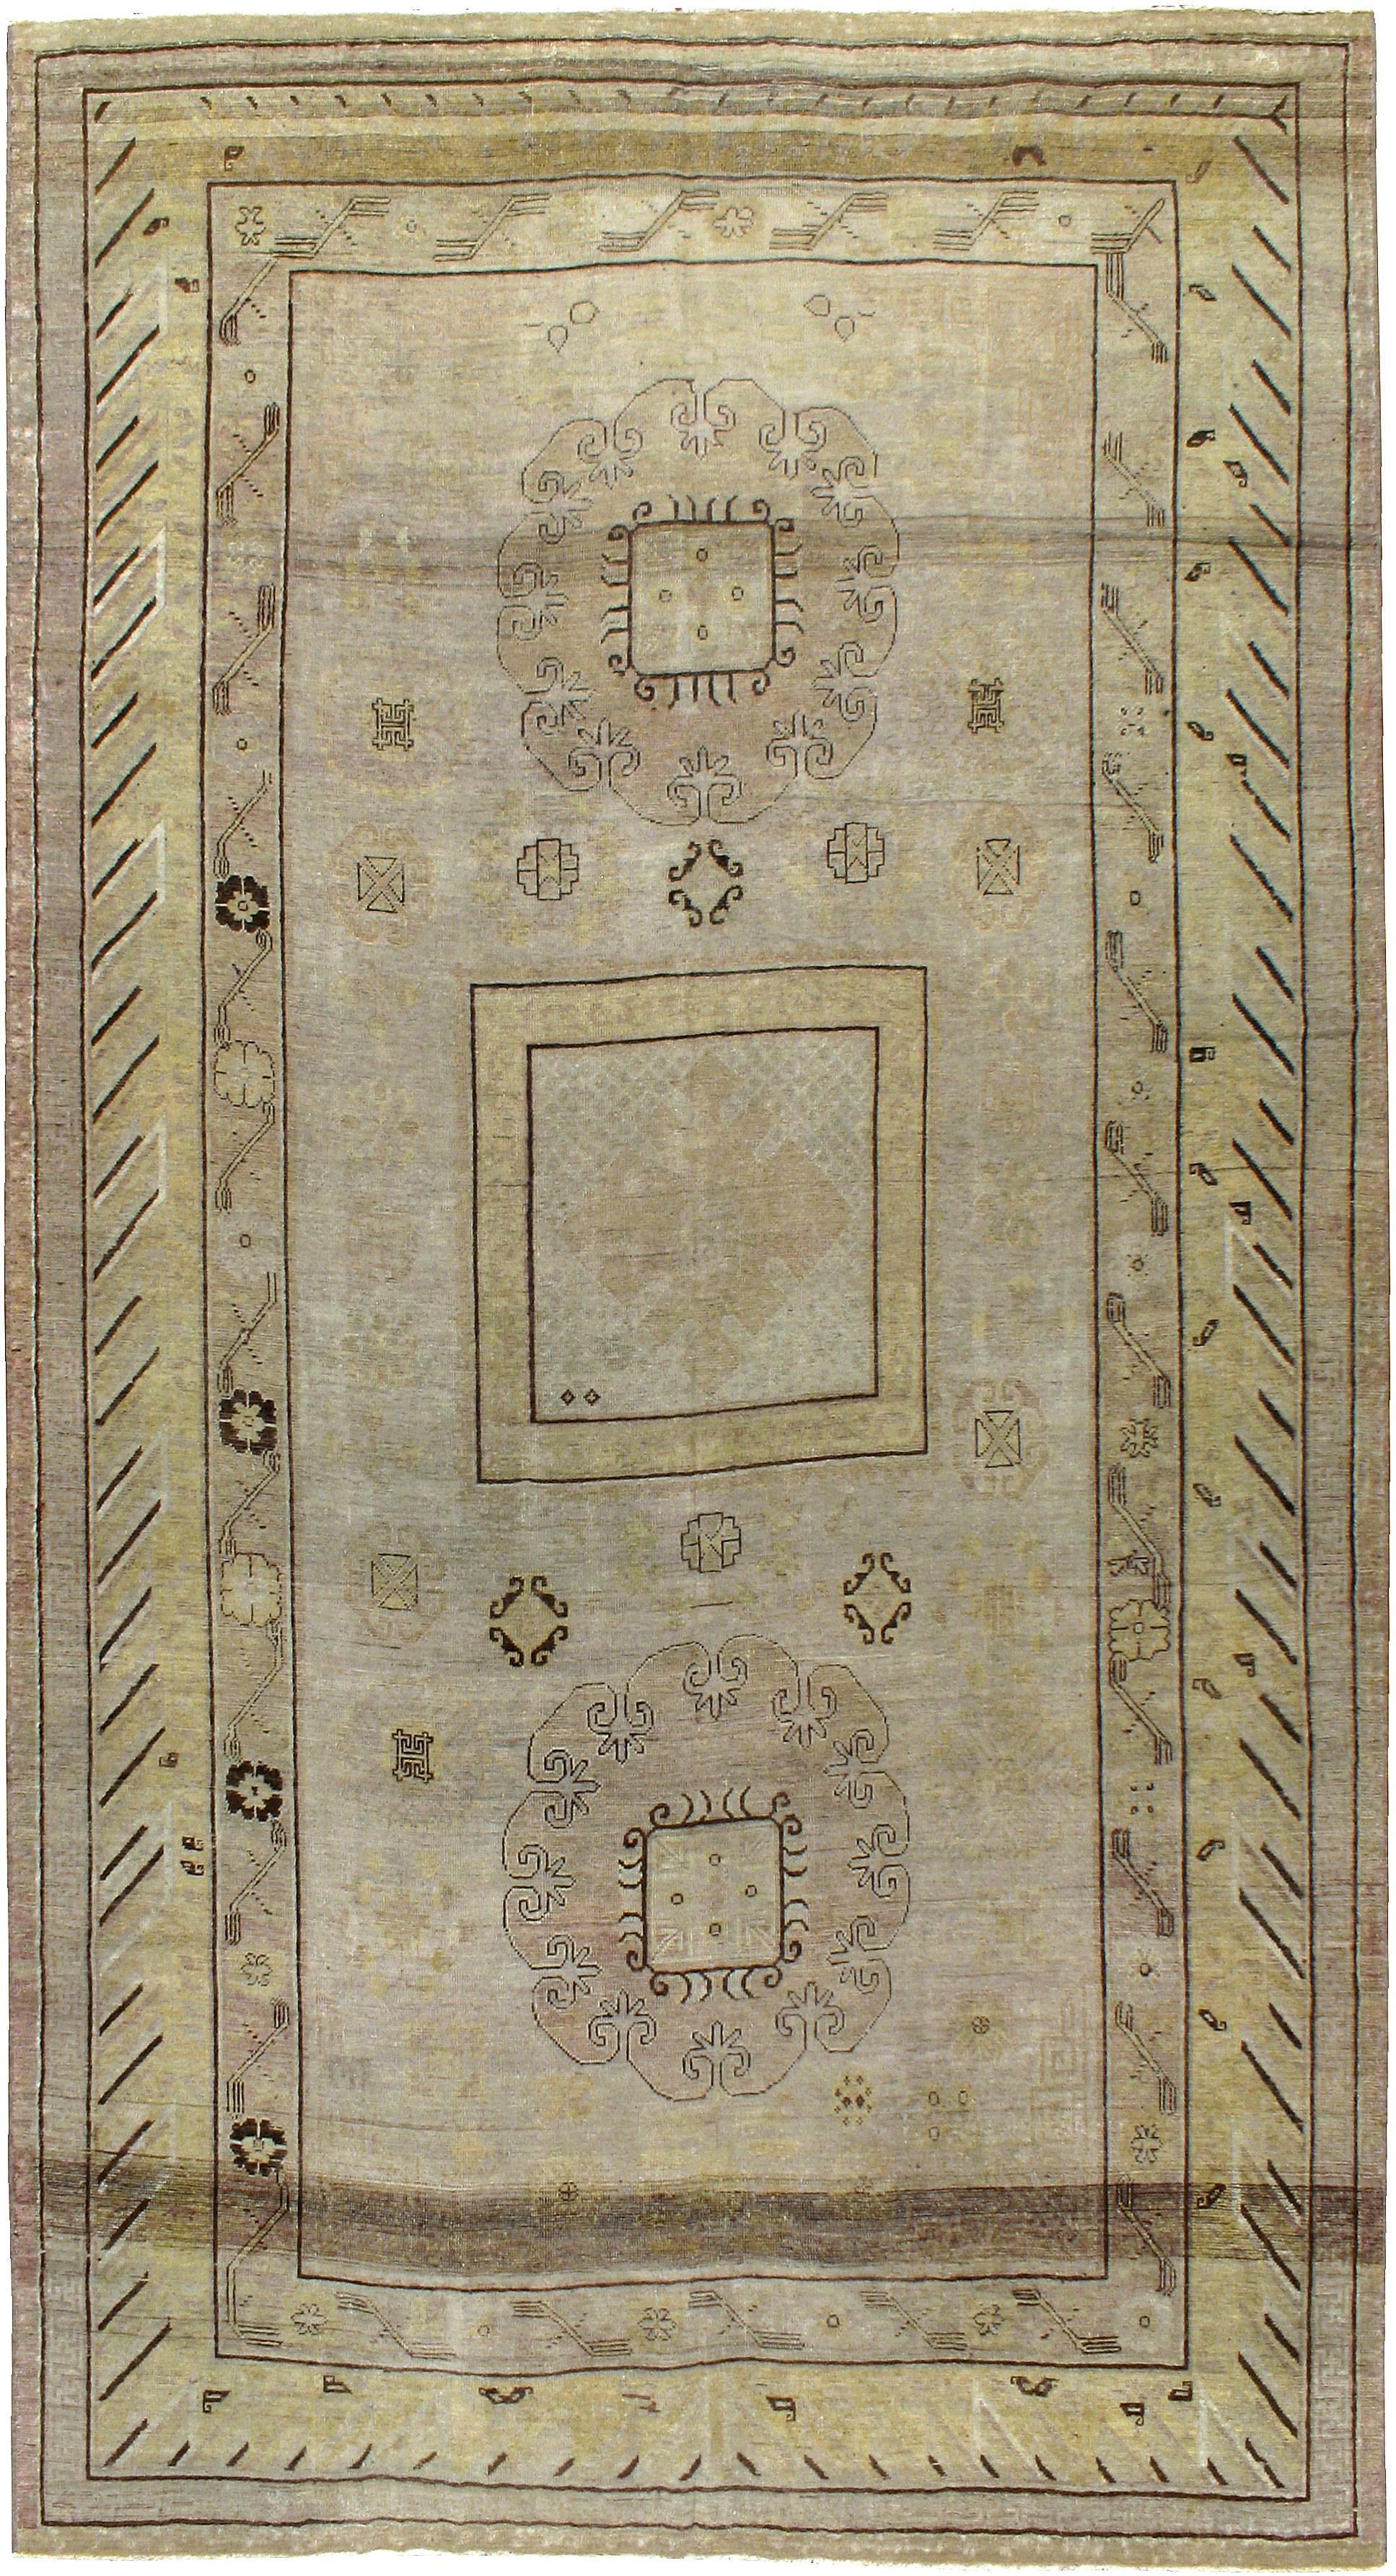 An antique East Turkestan Khotan carpet from the turn of the 20th century. Antique Khotan rugs and carpets were produced in the oasis town of Eastern Turkestan, today part of the Xinjiang region in Western China. This area has had a steady